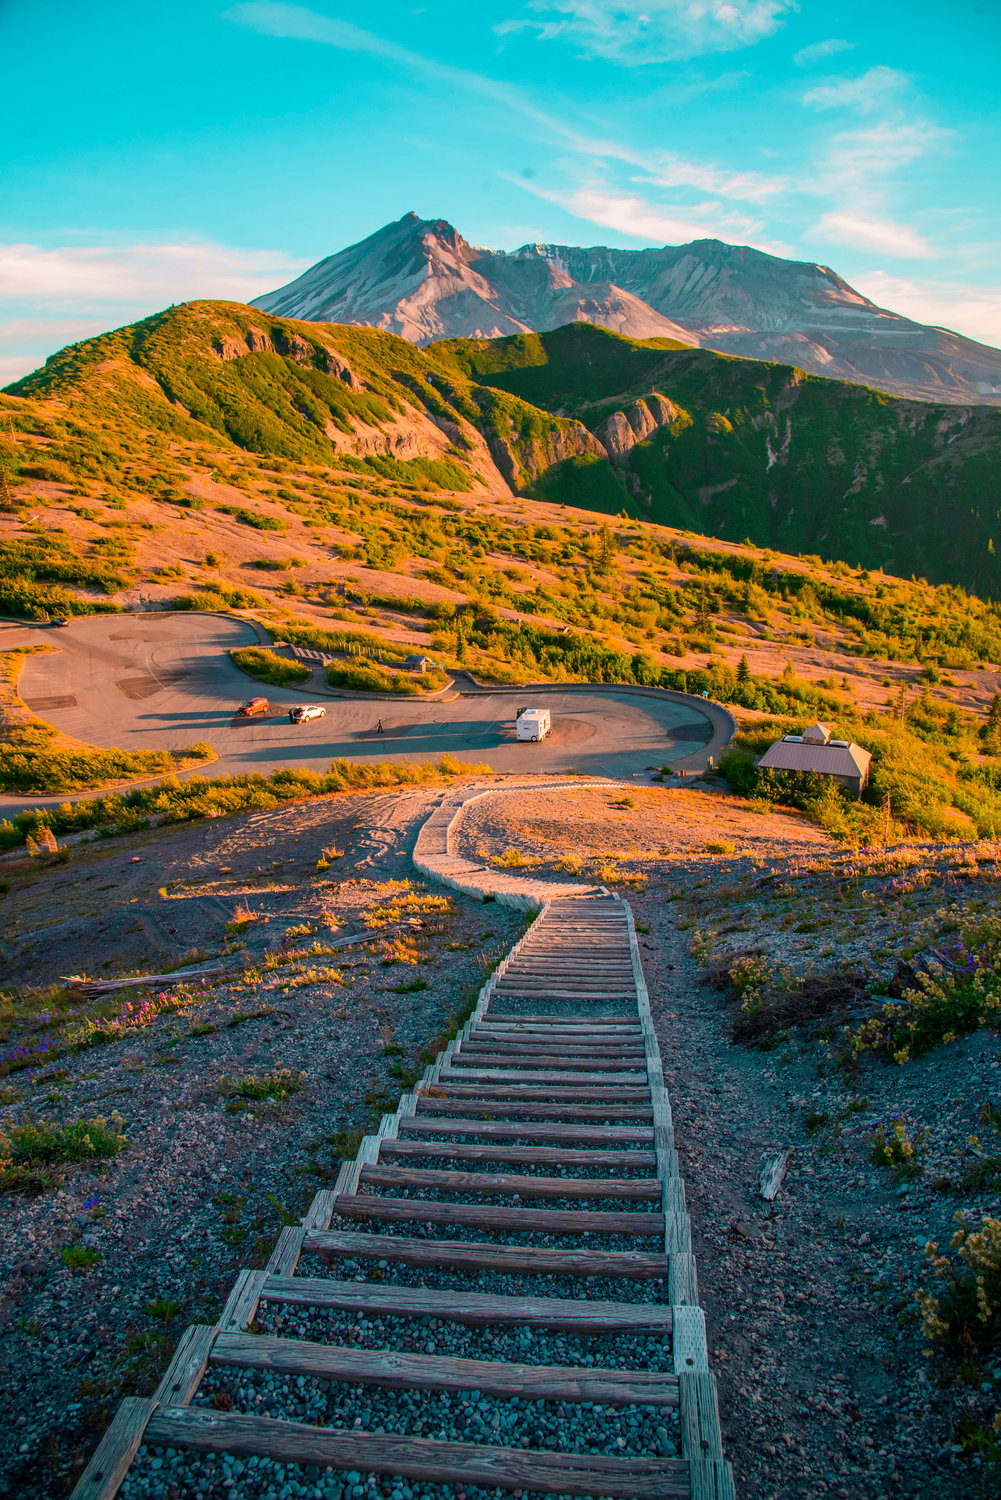 Sun shines on steps leading up the Windy Ridge Trail on Thursday near Mount St. Helens.